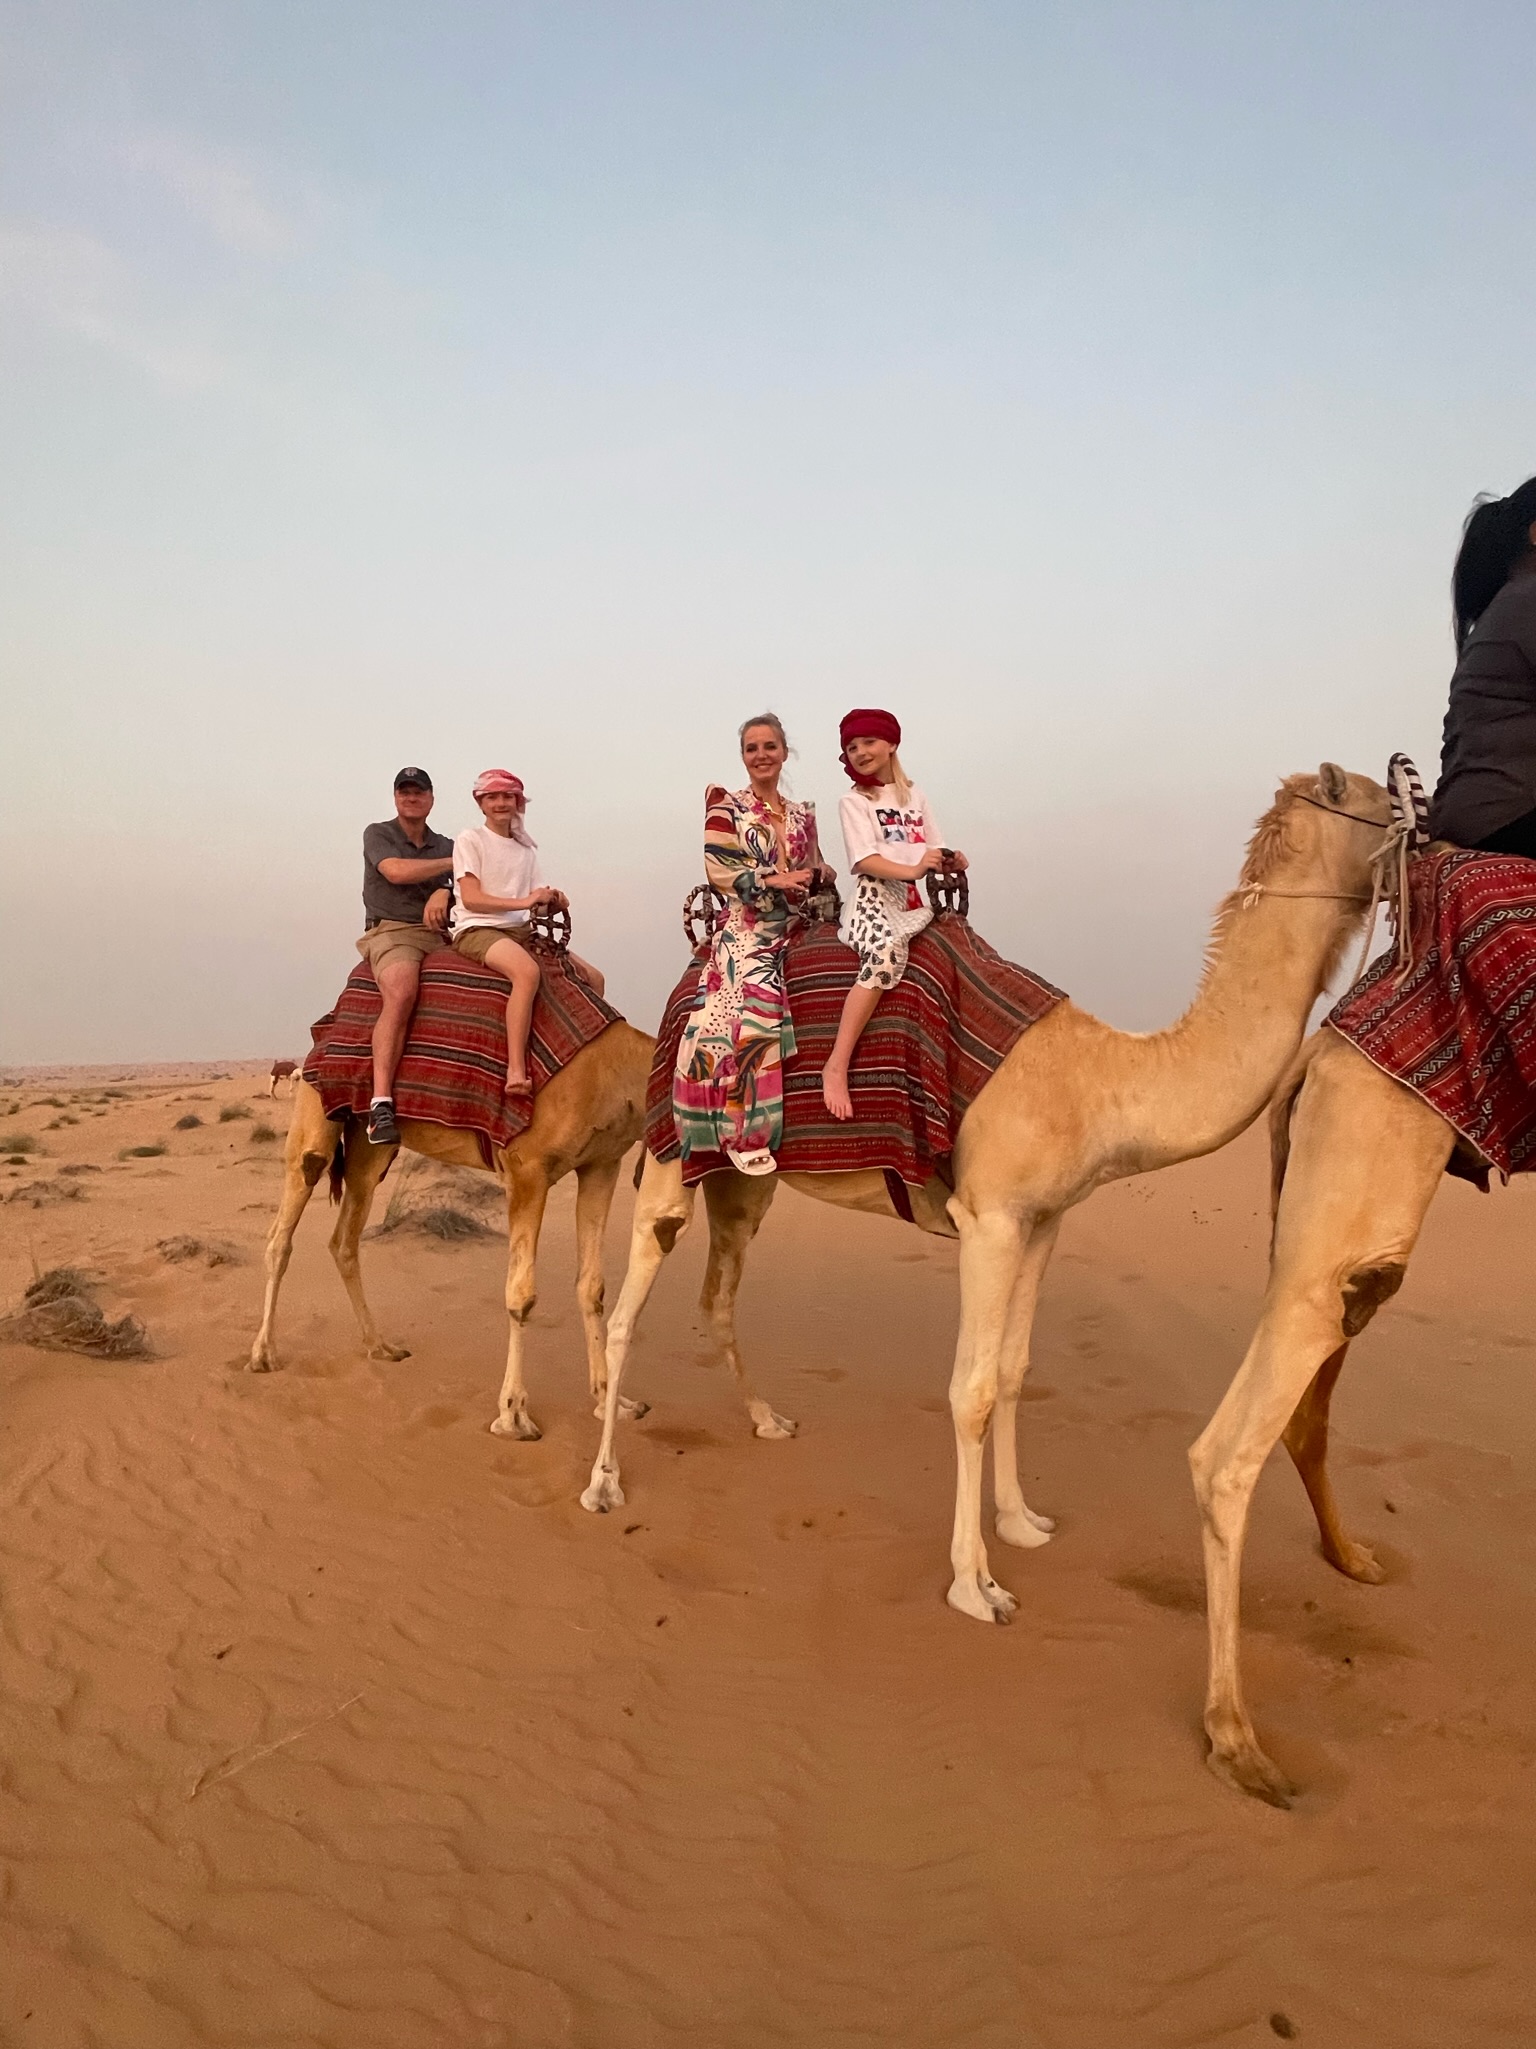 planning a trip to the middle east, where to go in the middle east, how to plan a trip to the middle east, dubai, united arab emirates, UAE, erin busbee, busbee style, busbee family travels, desert safari, platinum heritage desert safari, riding camels in desert, the empty quarter